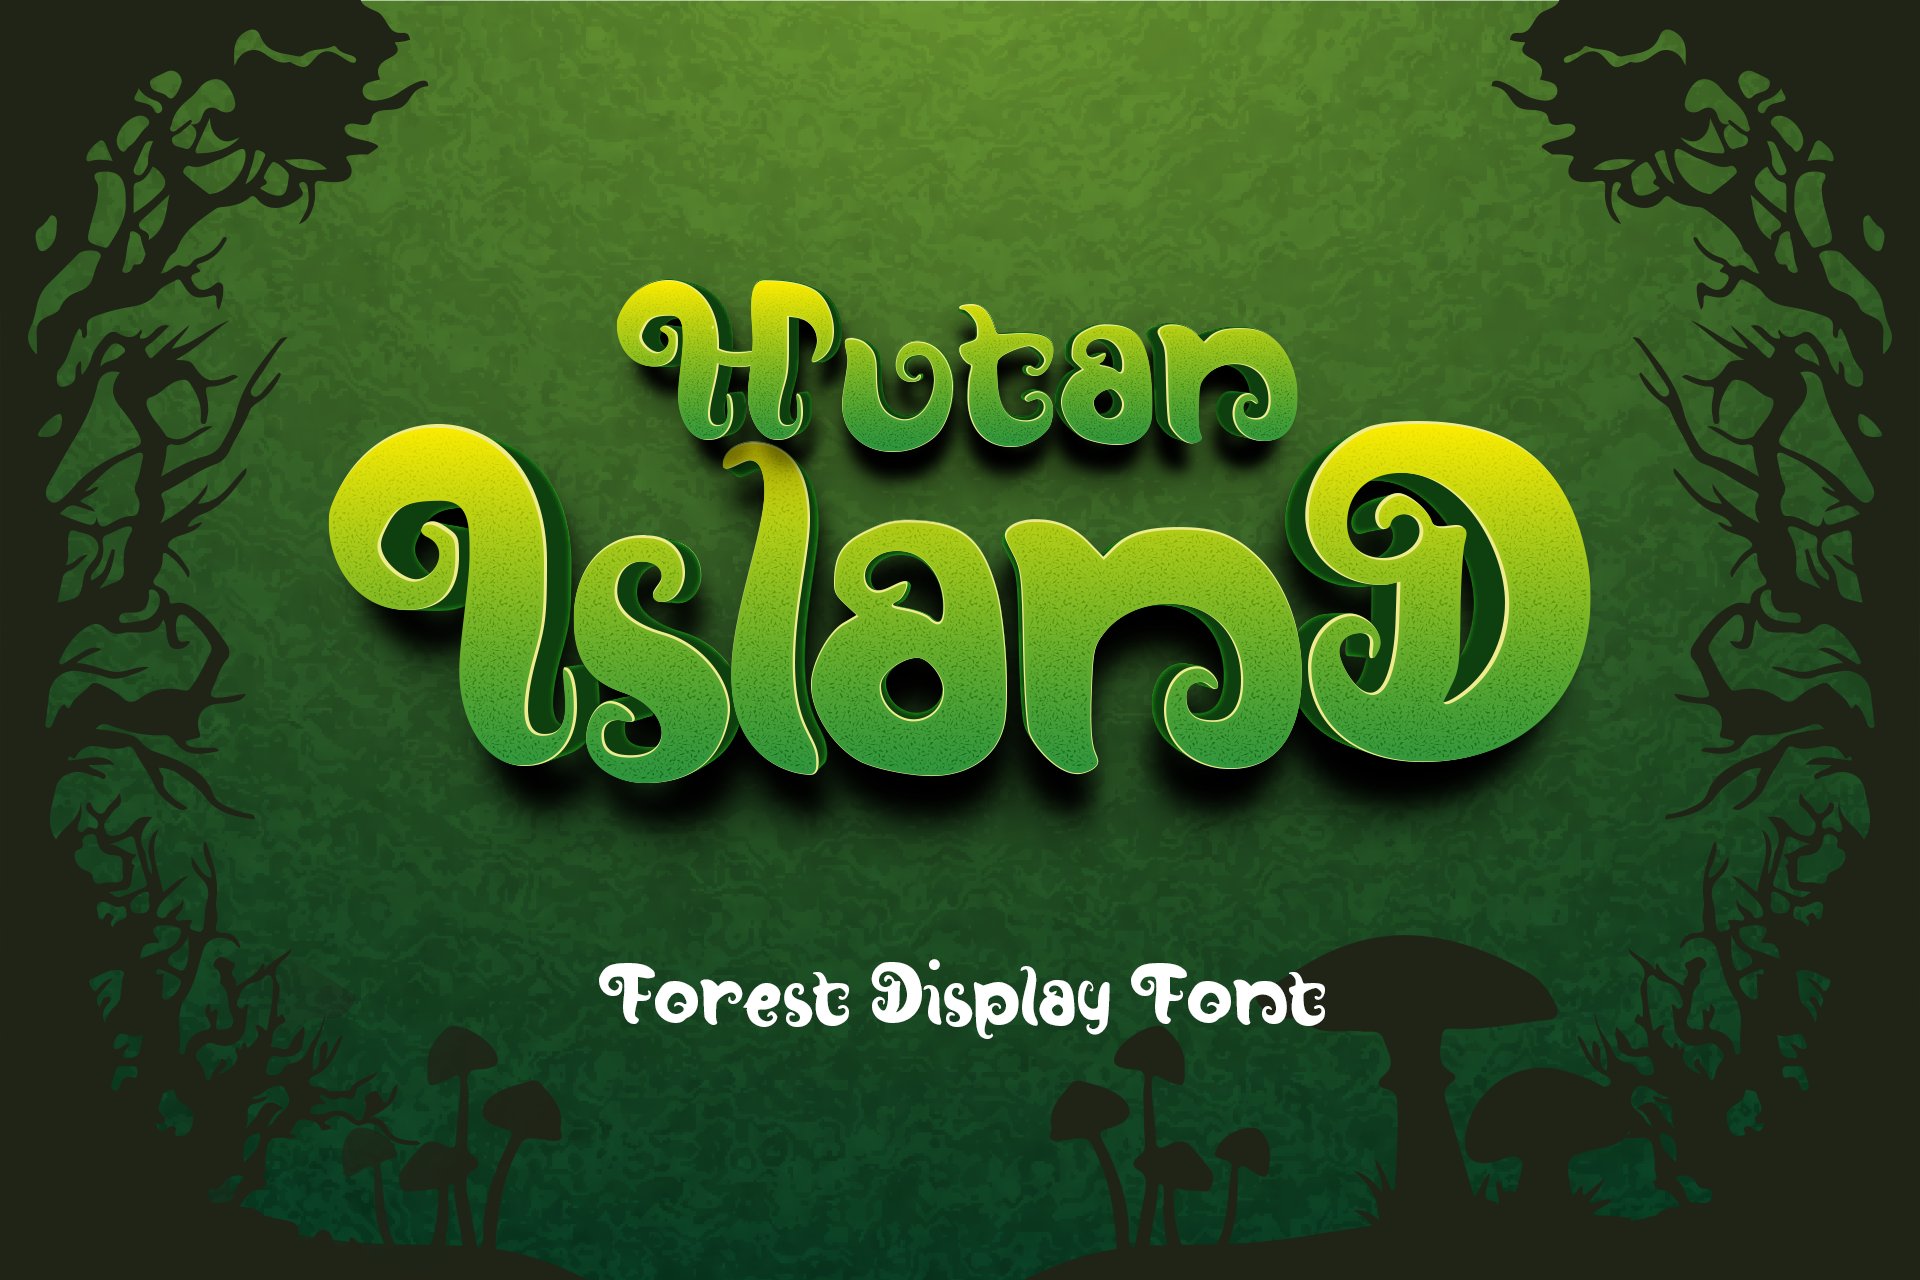 Hutan-Island Forest Display Font cover image.